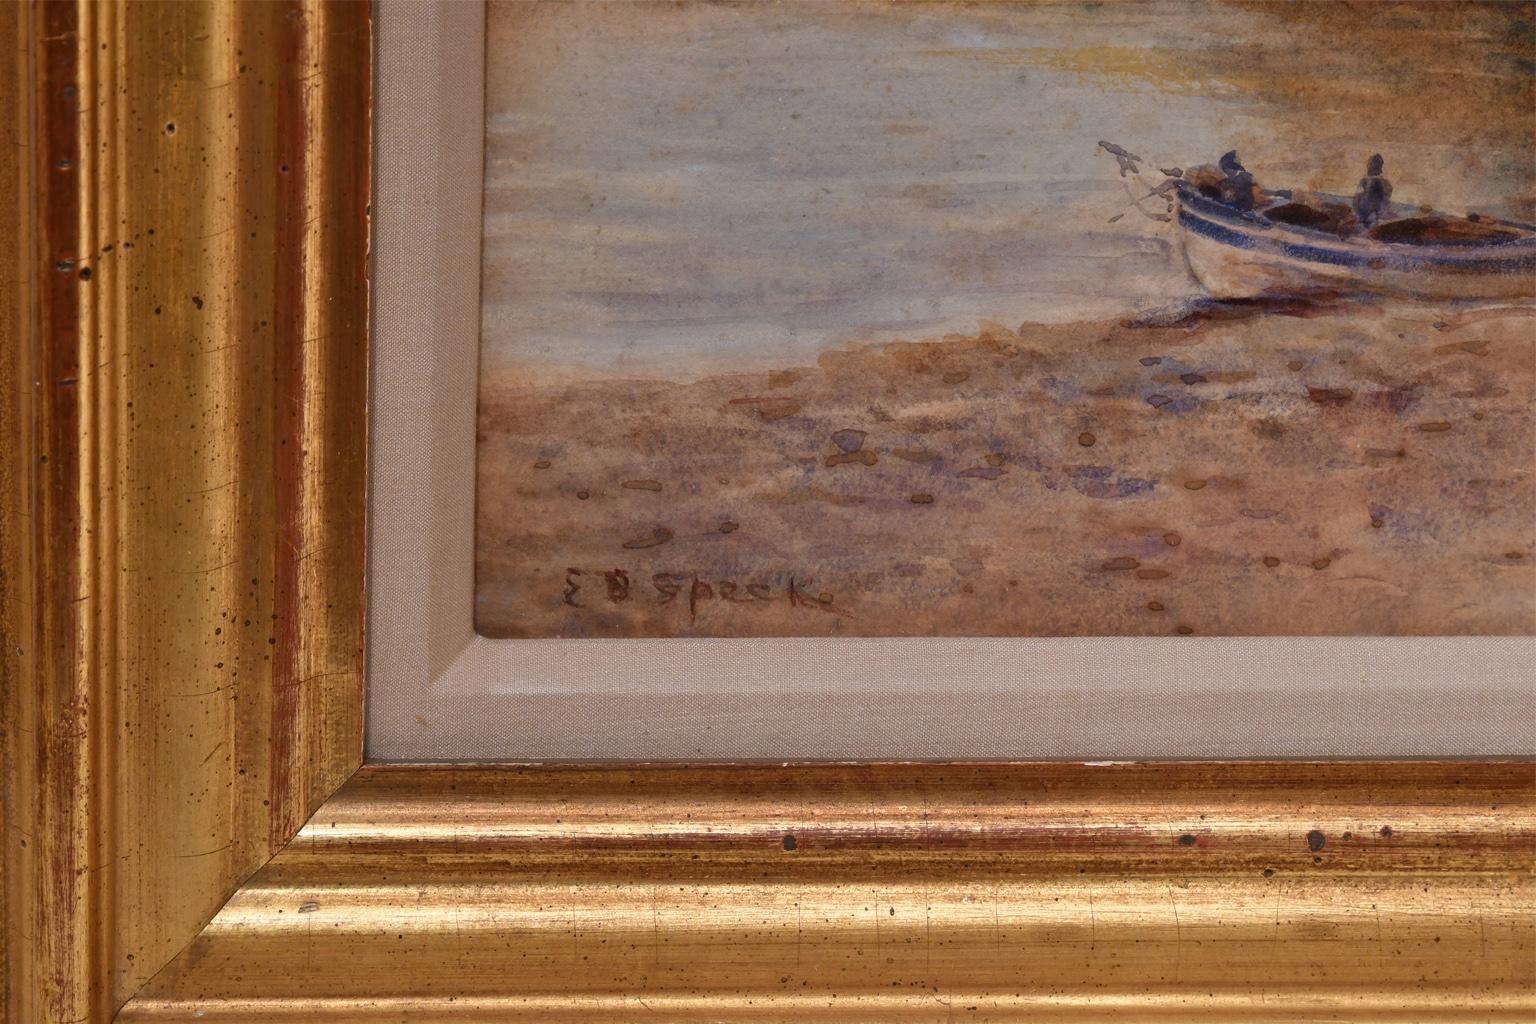 Romantic Watercolor of Boat in a Cove by Cliffs, Signed E. Ö. Speck in Gilded Frame For Sale